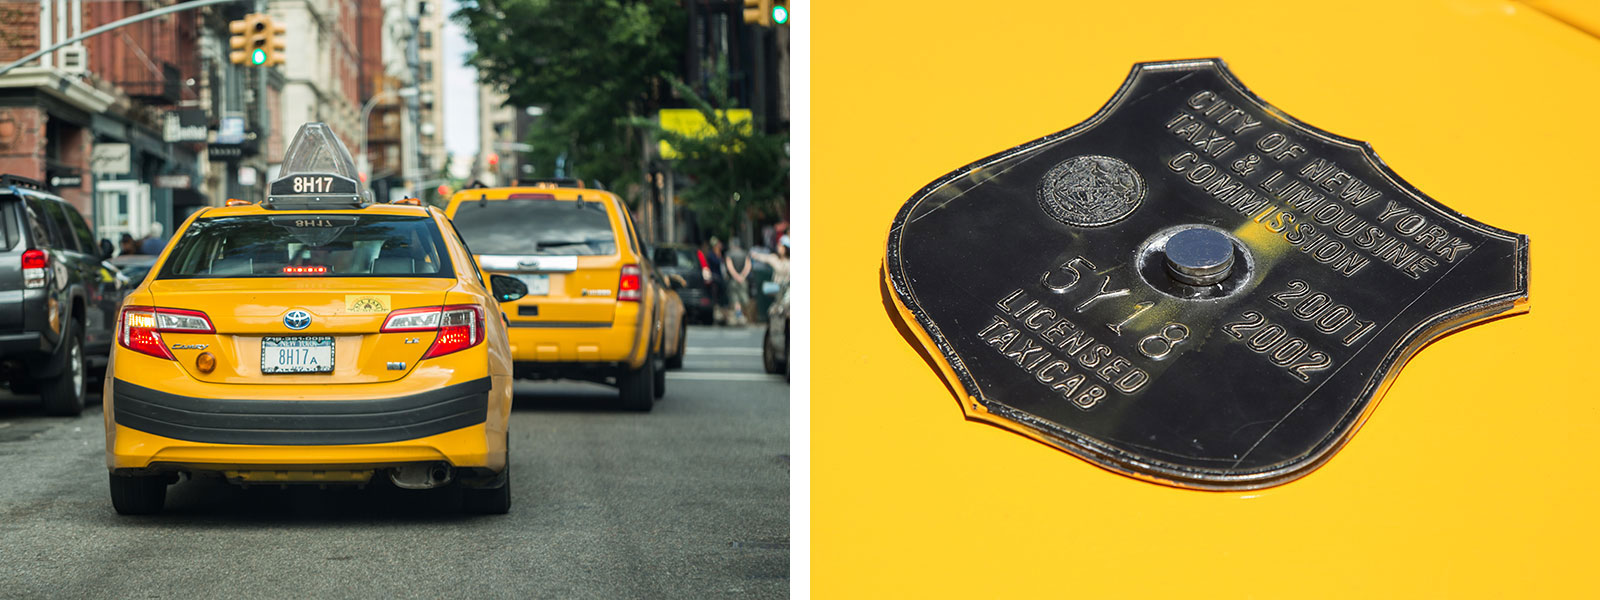 Left: Taxi cabs driving through the streets of New York City. Right: A New York City taxi medallion is pictured.